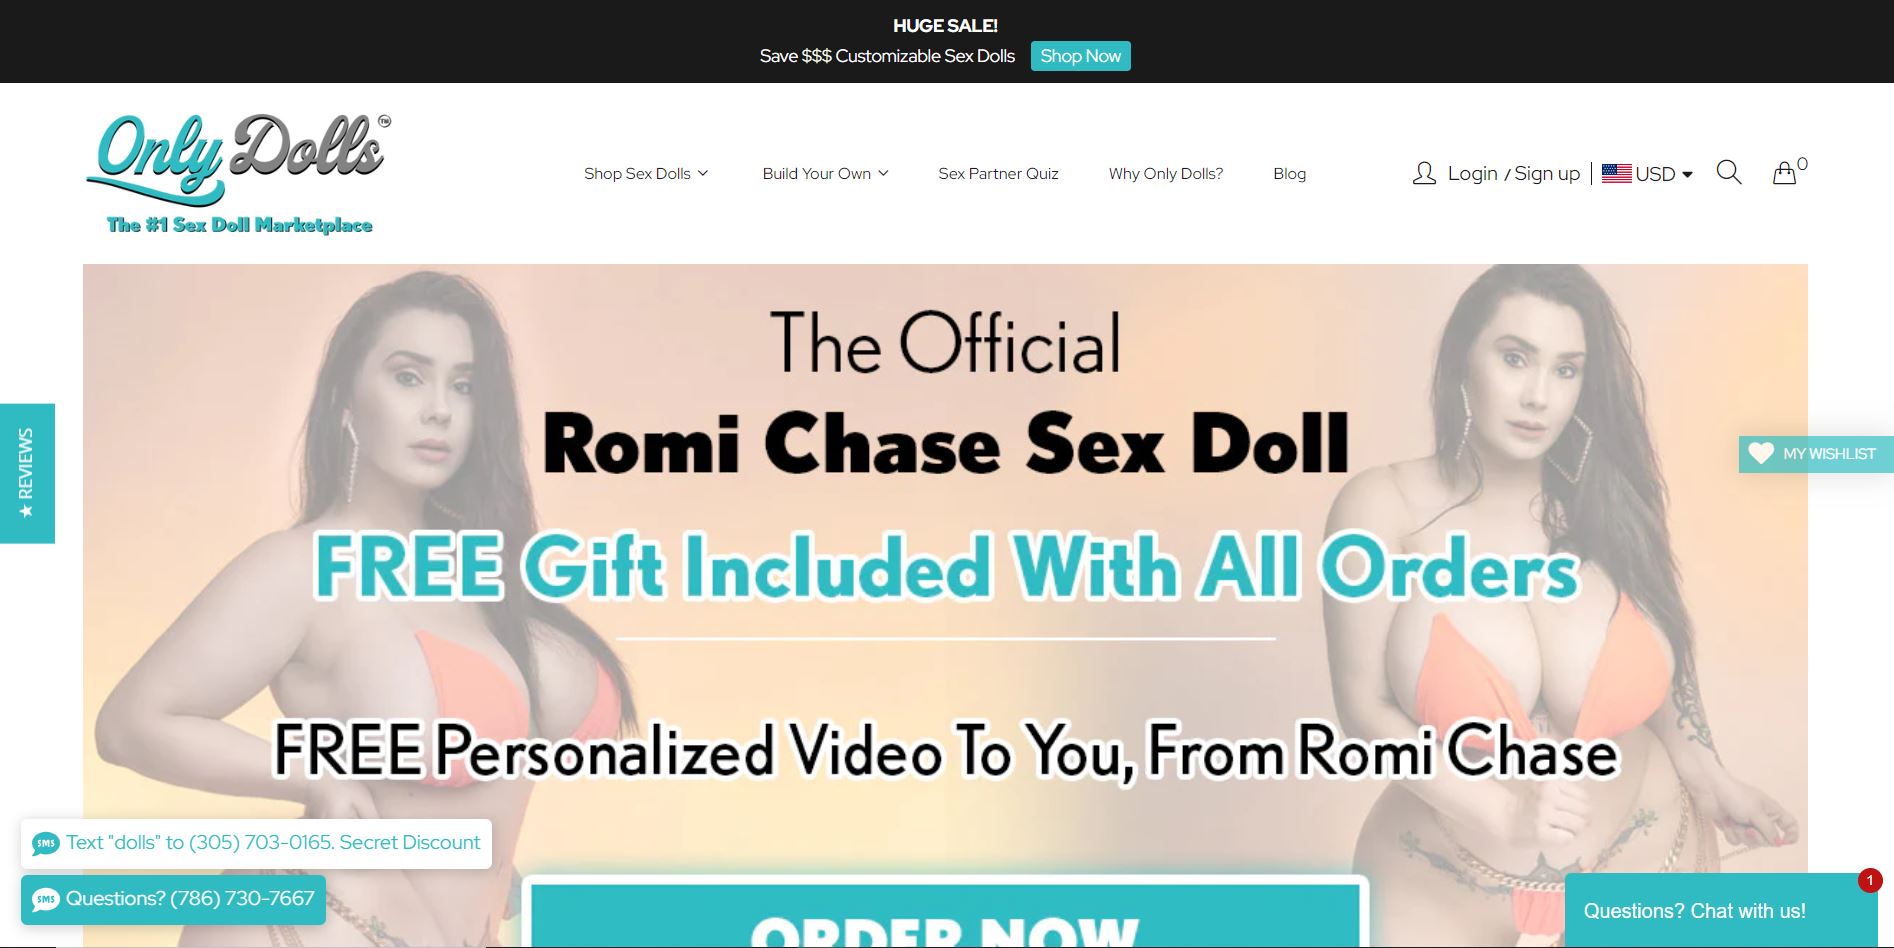 End Your Search for the Cheapest Sex Dolls at Only Dolls